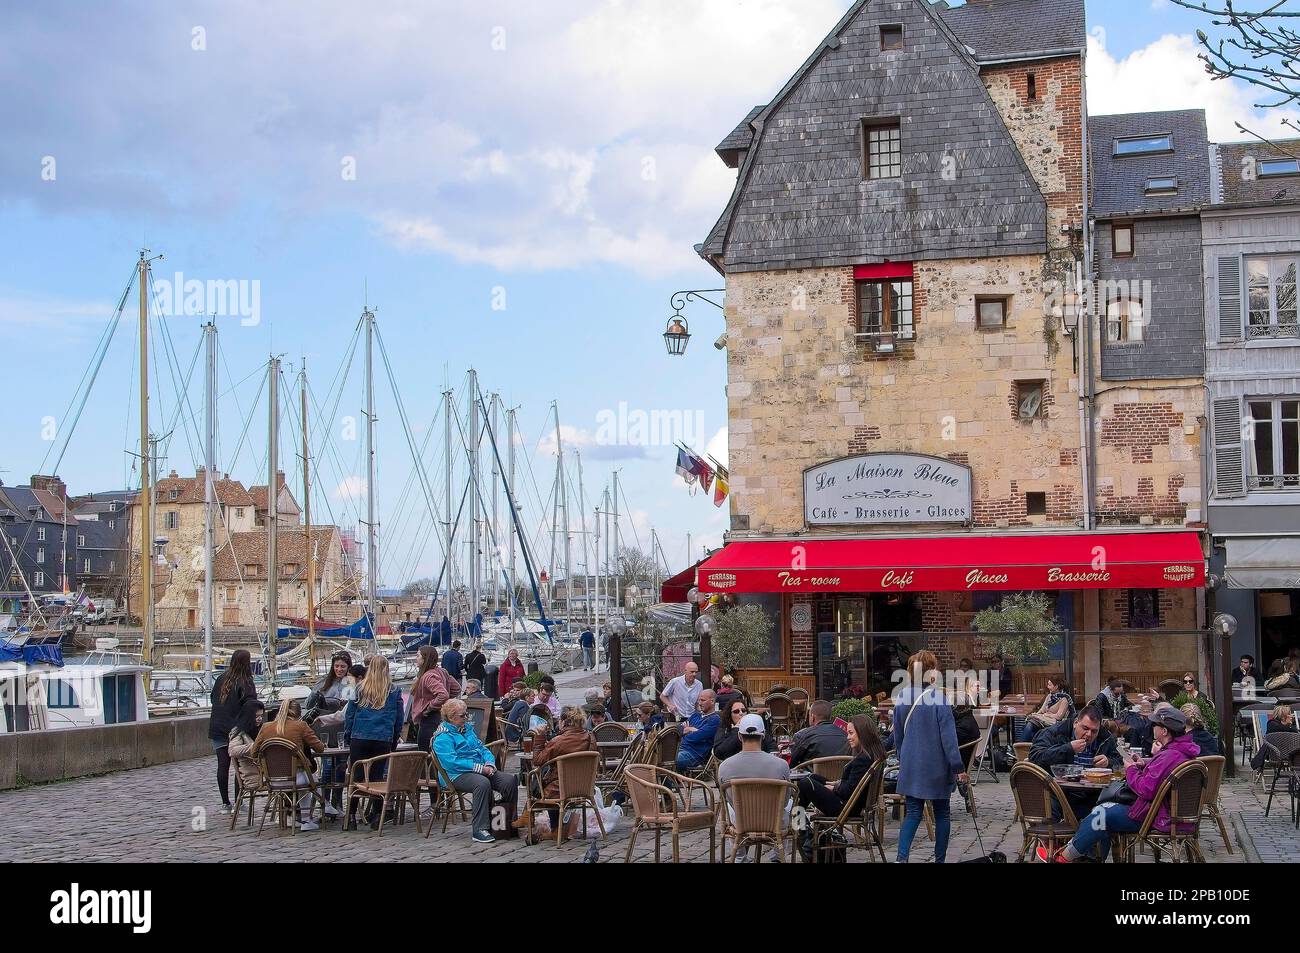 Harbourside Cafe / Brasserie, with red canopy and outside seating, Honfleur, Normandy, France, Stock Photo